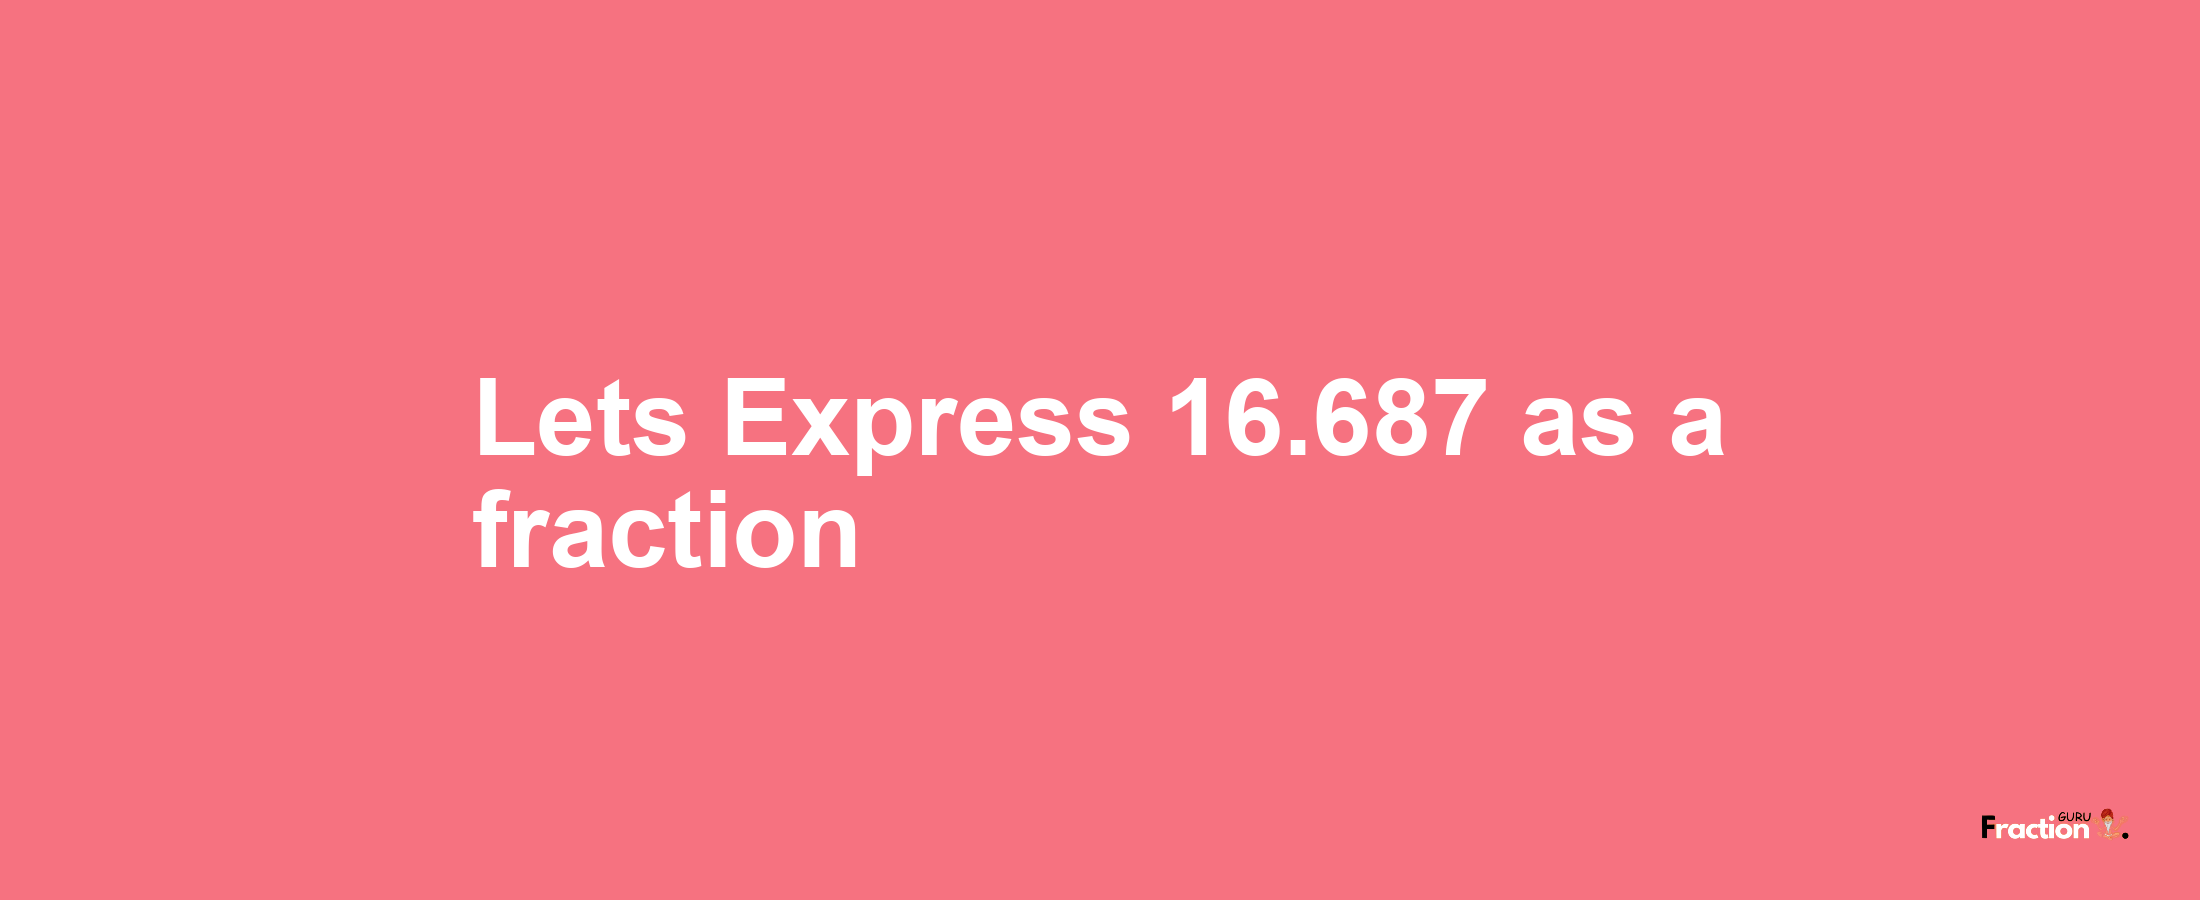 Lets Express 16.687 as afraction